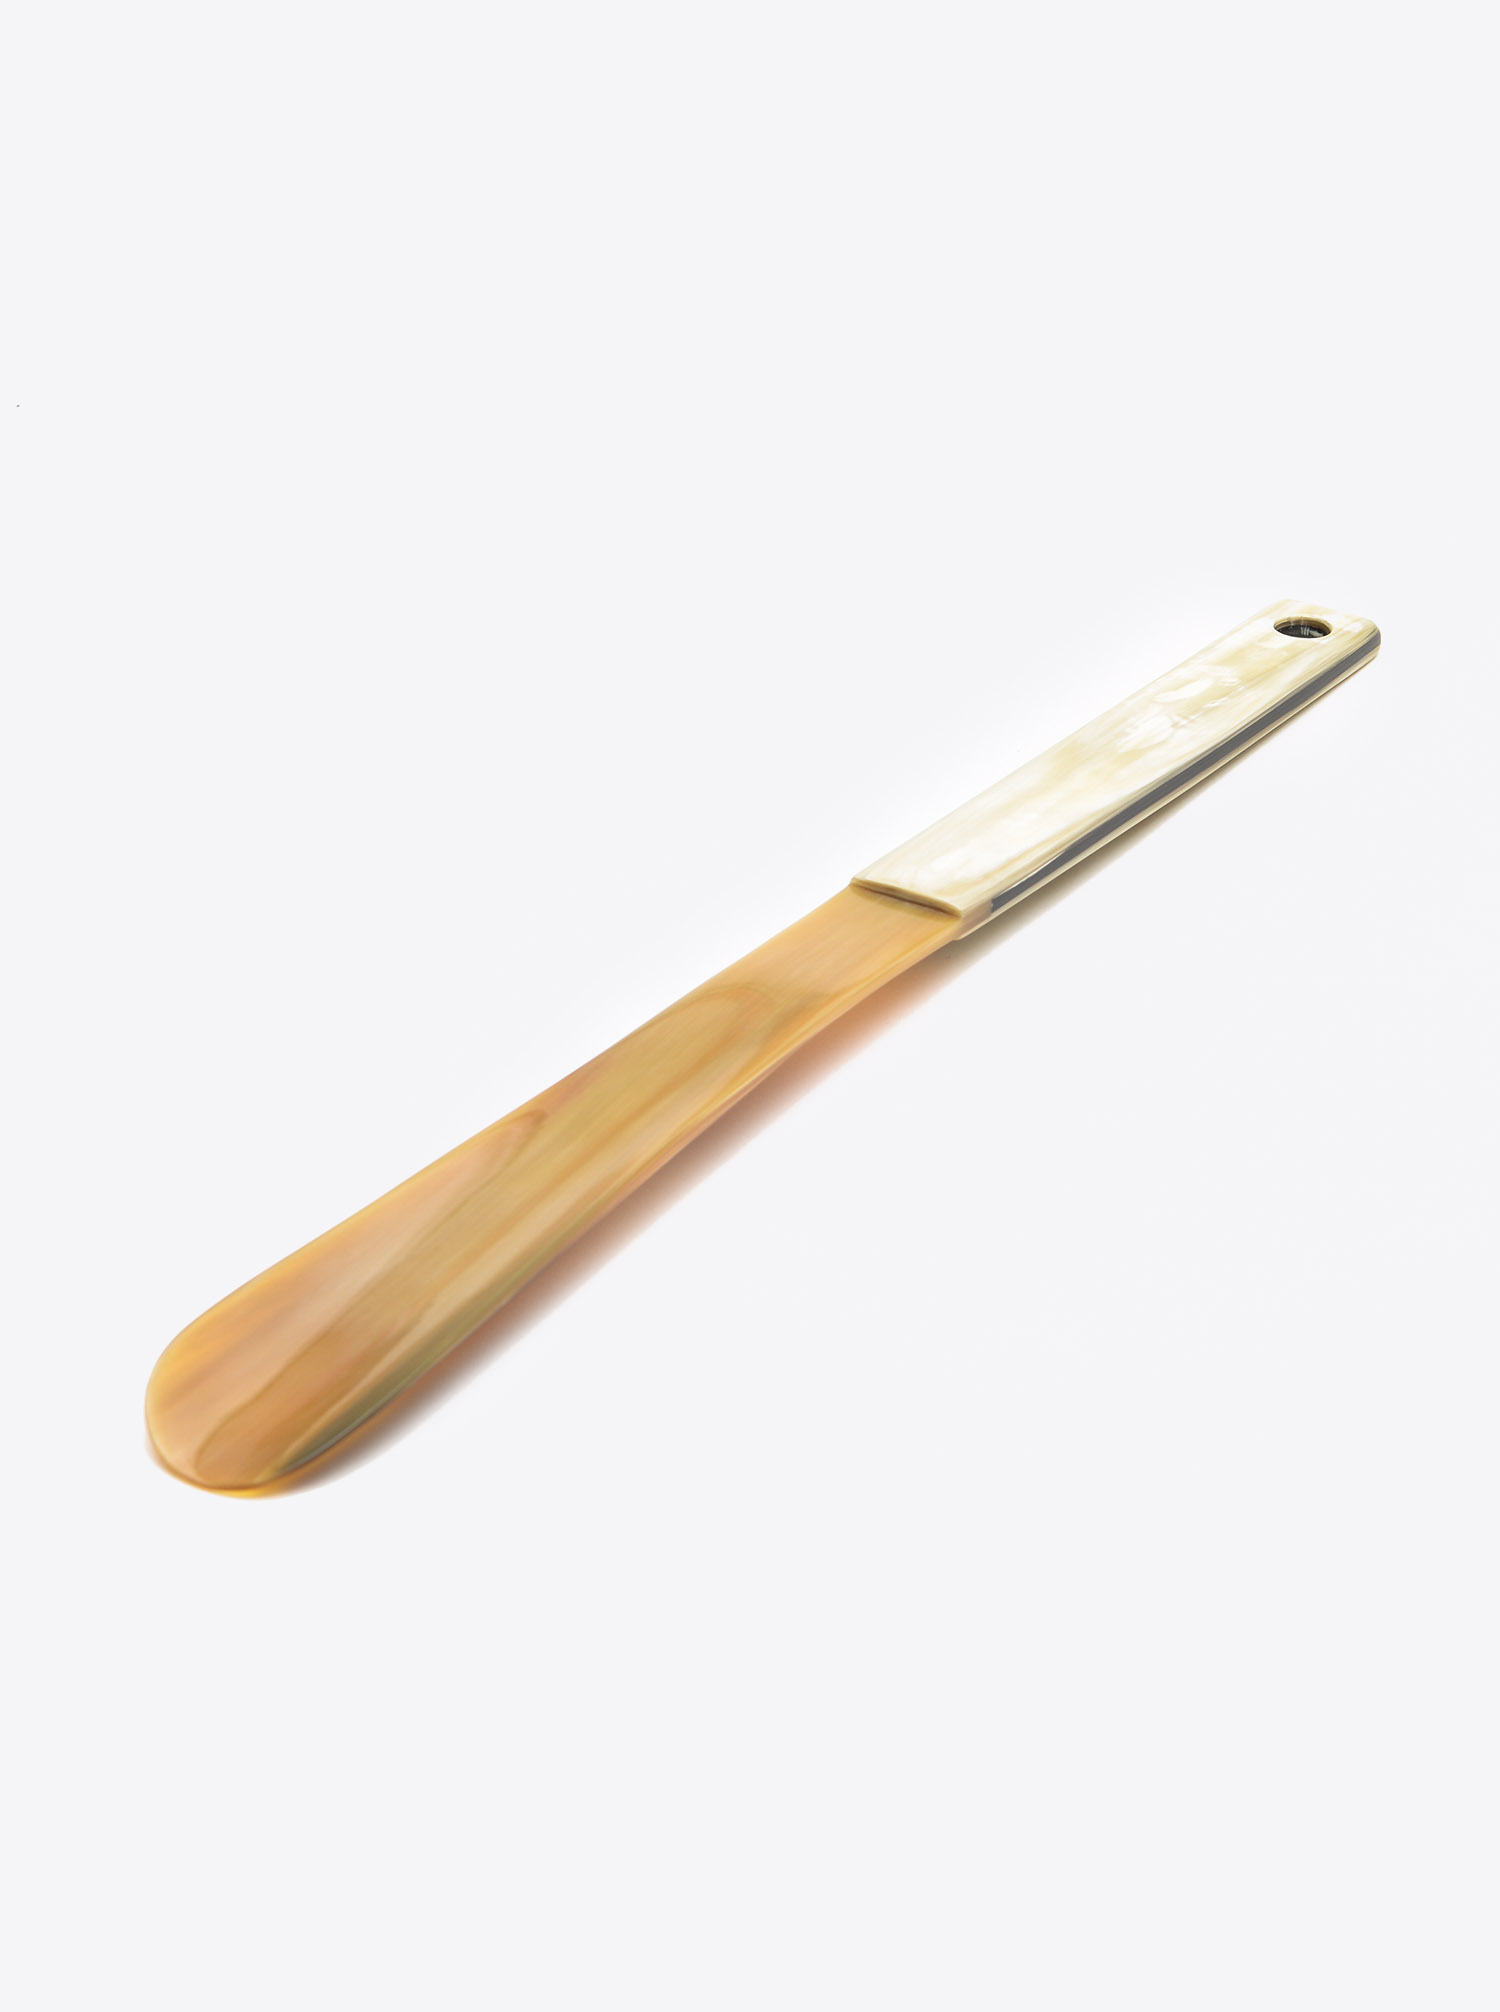 Shoehorn made of Horn light with dark handle